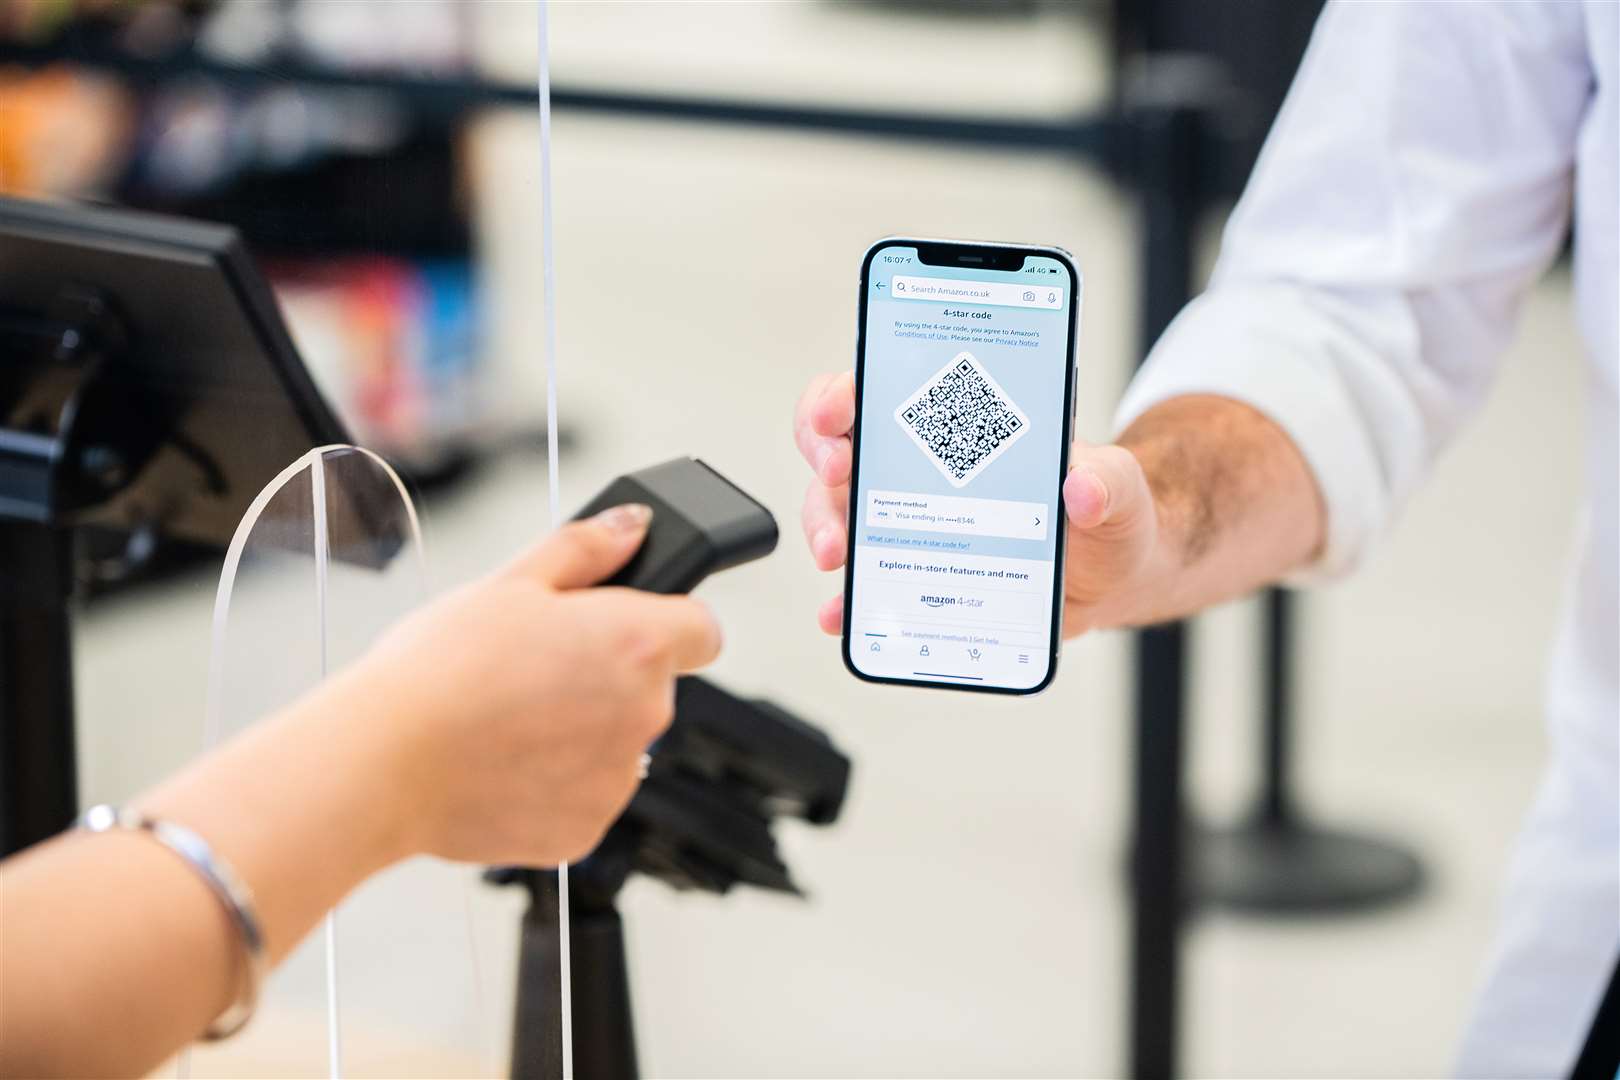 Items can be paid for using a QR code which is linked to the customer's Amazon account. Photo: Amazon